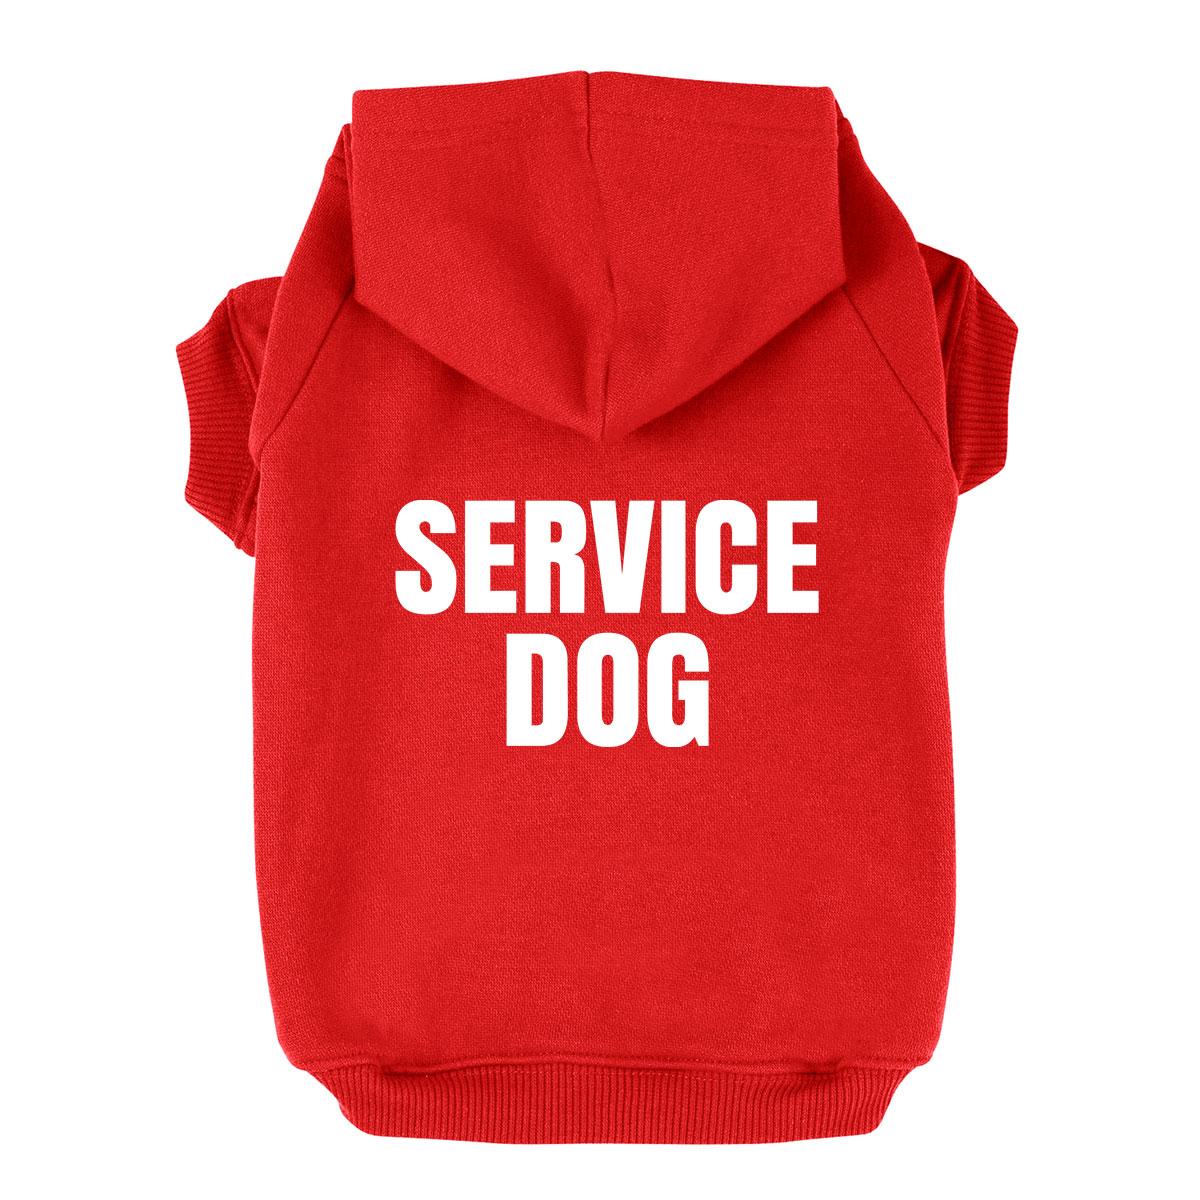 Service Dog Hoodie - Red